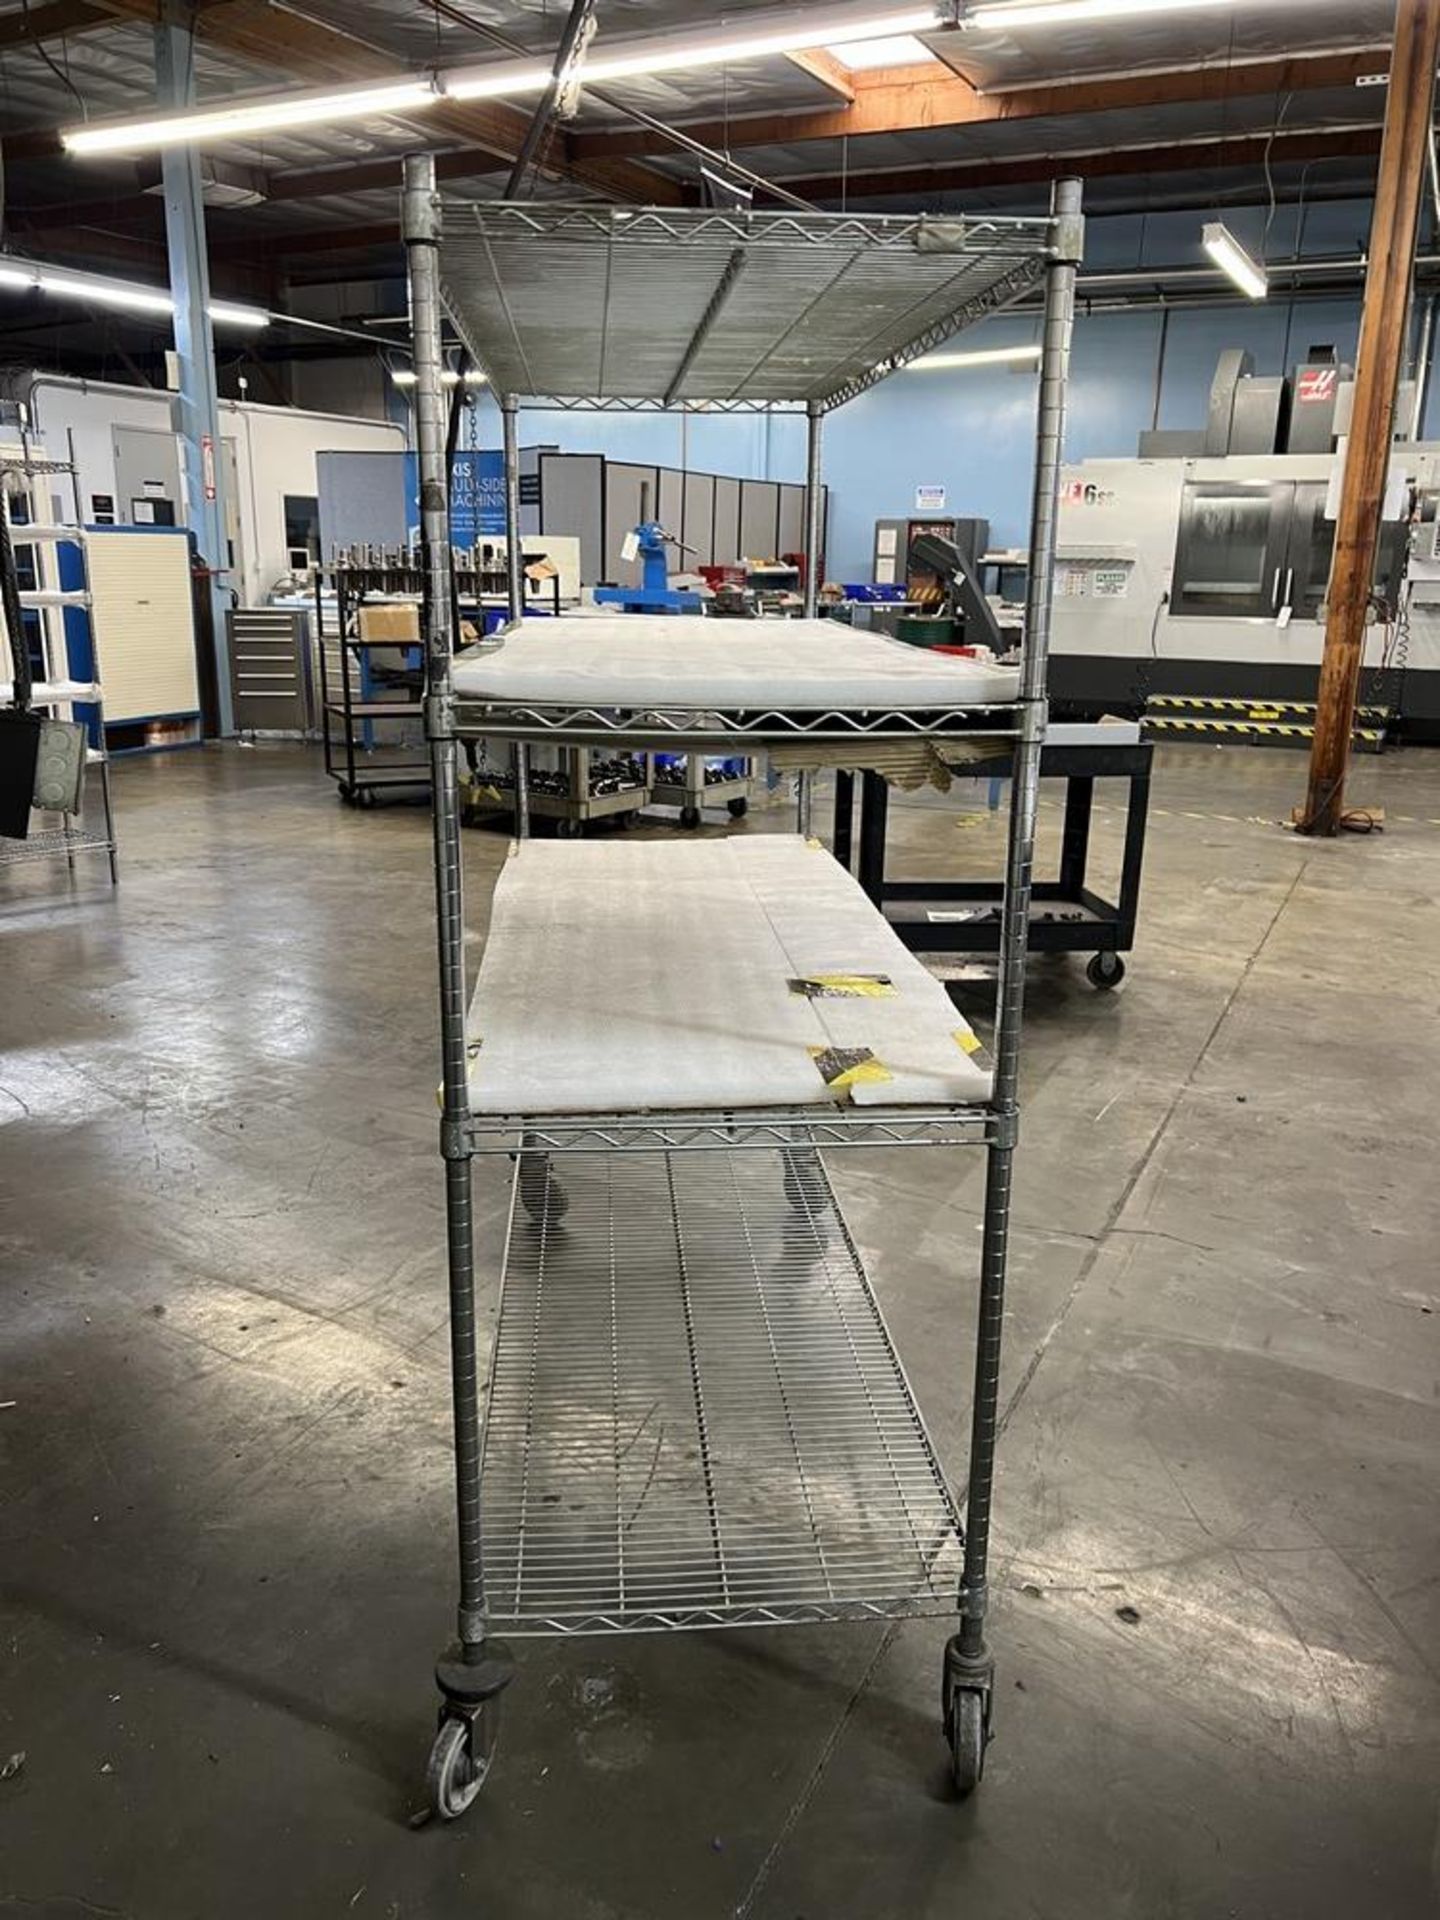 4 Tier Rolling Wire Rack 59" x 24" x 67" - Image 2 of 3